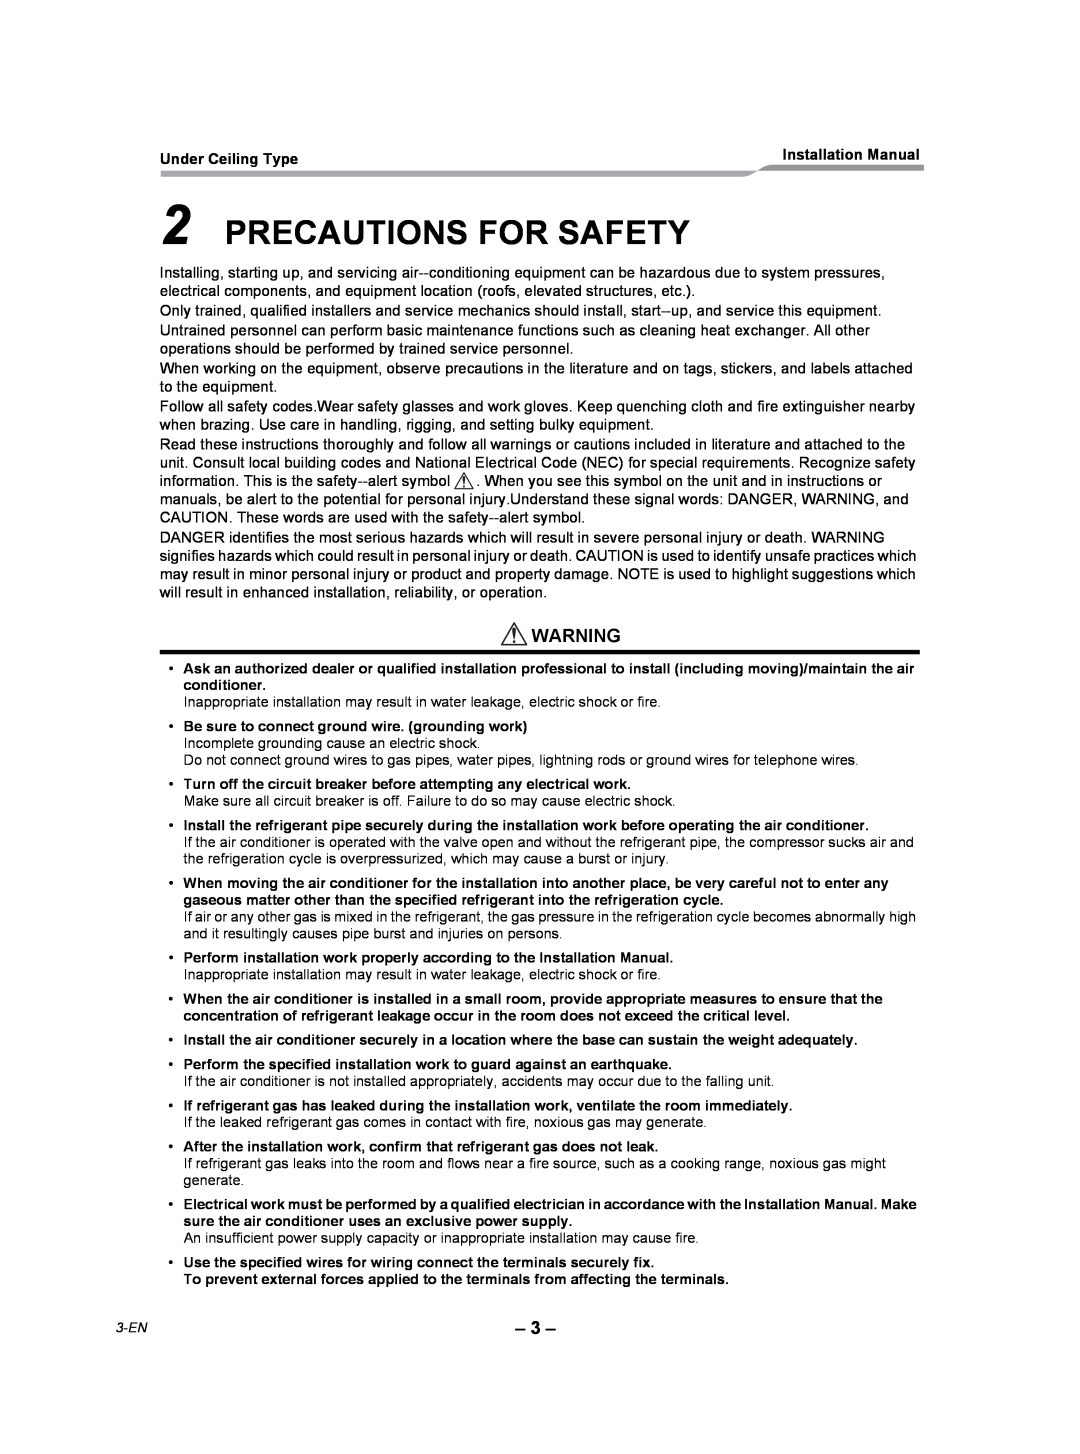 Toshiba RAV-SP360CT-UL, RAV-SP420CT-UL, RAV-SP300CT-UL, RAV-SP180CT-UL Precautions For Safety, Under Ceiling Type 